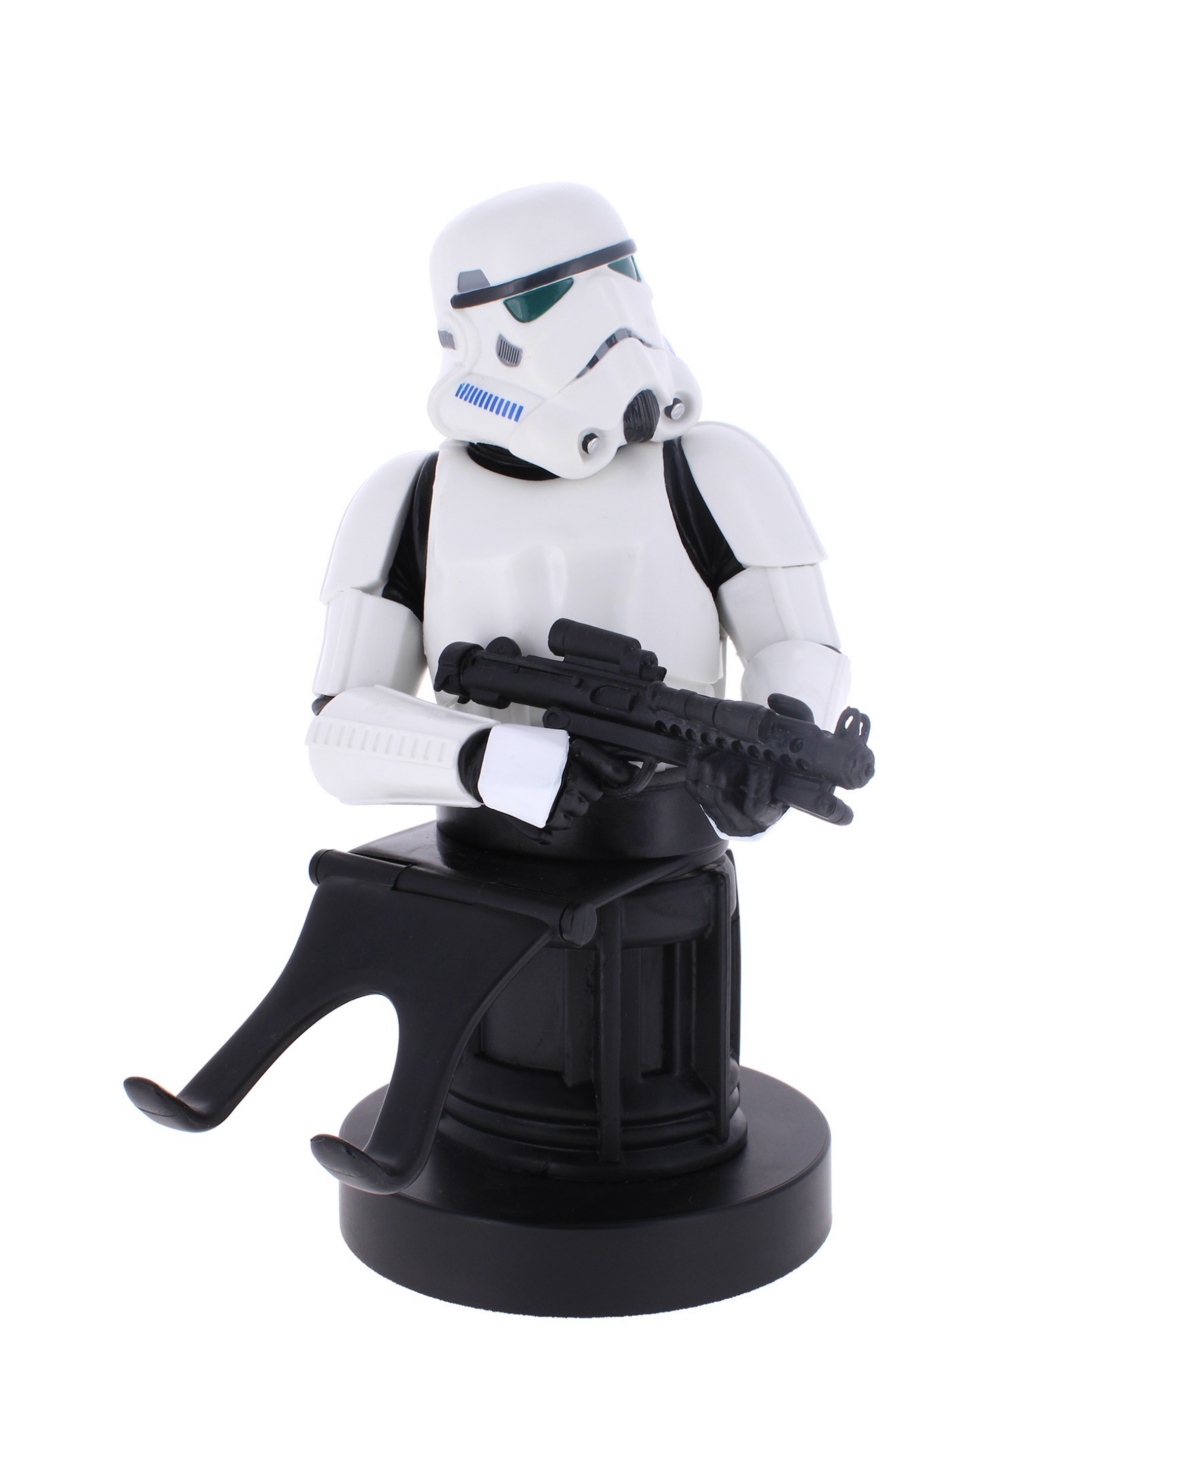 Star Wars Imperial Stormtrooper Cable Guy Mobile Phone And Controller Holder In Multi